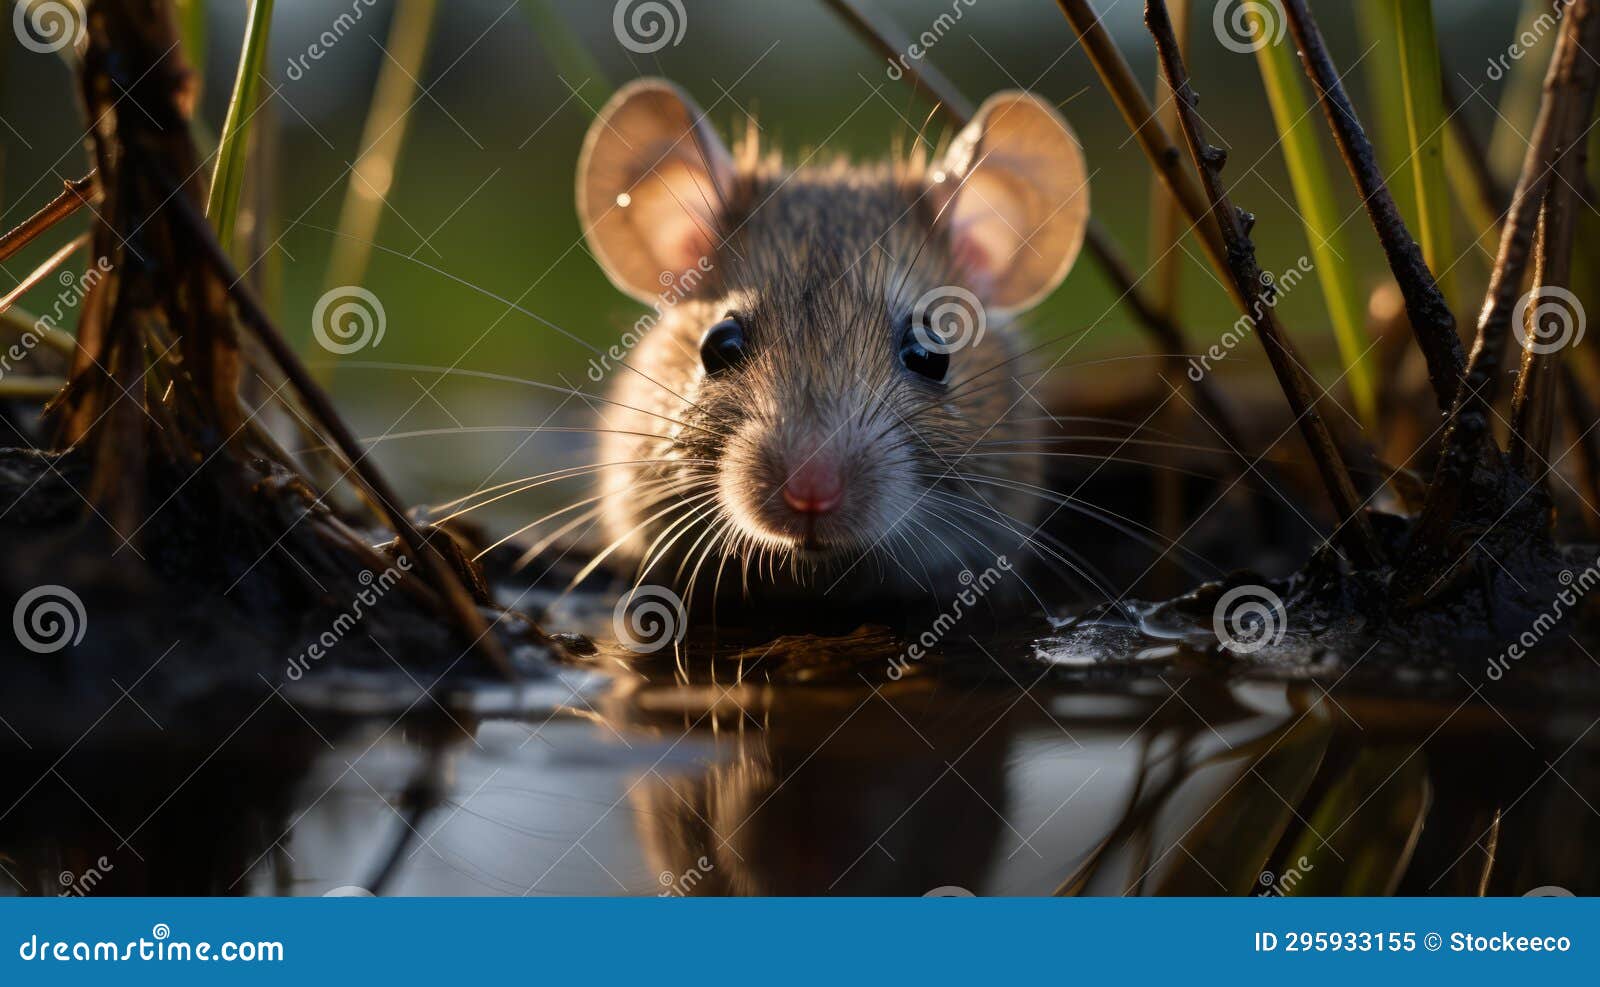 peeking mouse: characterful animal portrait in vignette style